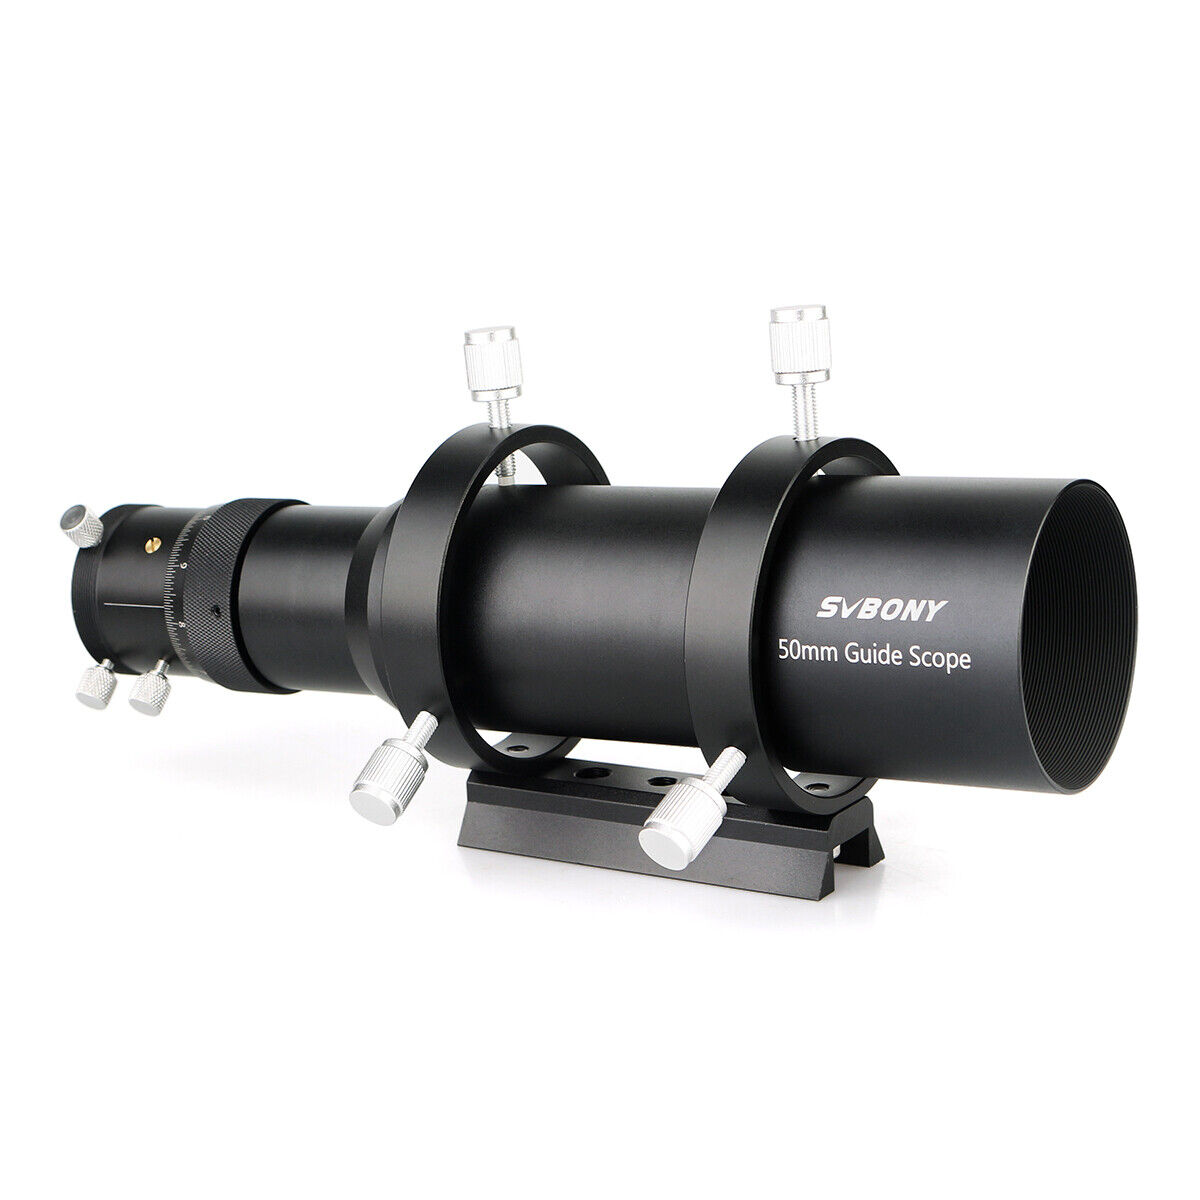 SVBONY Guide Scope 50mm CCD Imaging Telescope Finderscope Astrophotography SV106